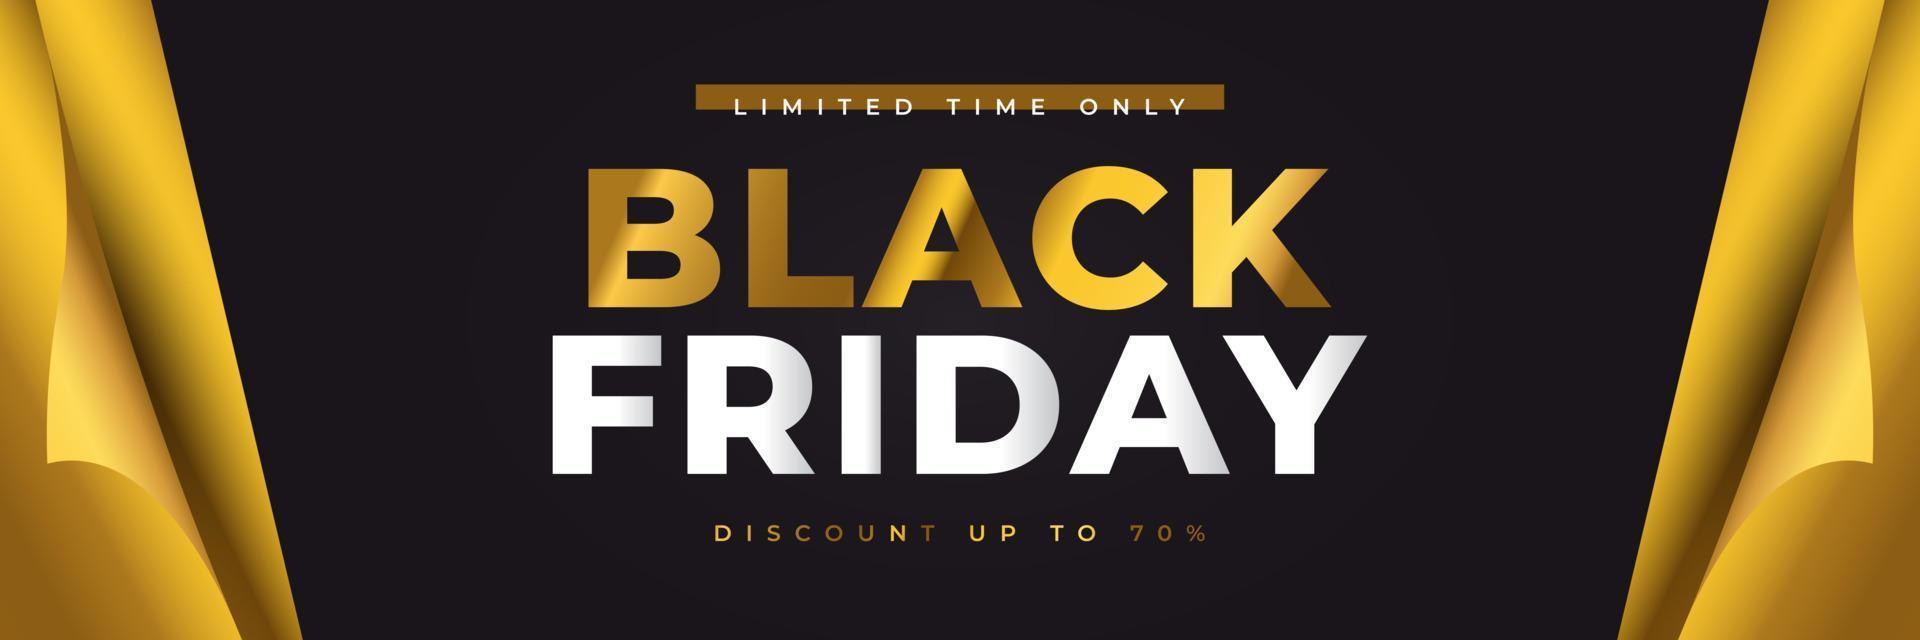 Black Friday Sale Banner or Poster with Gold Open Gift Wrap Paper. Advertising Banner Design for Black Friday Campaign vector